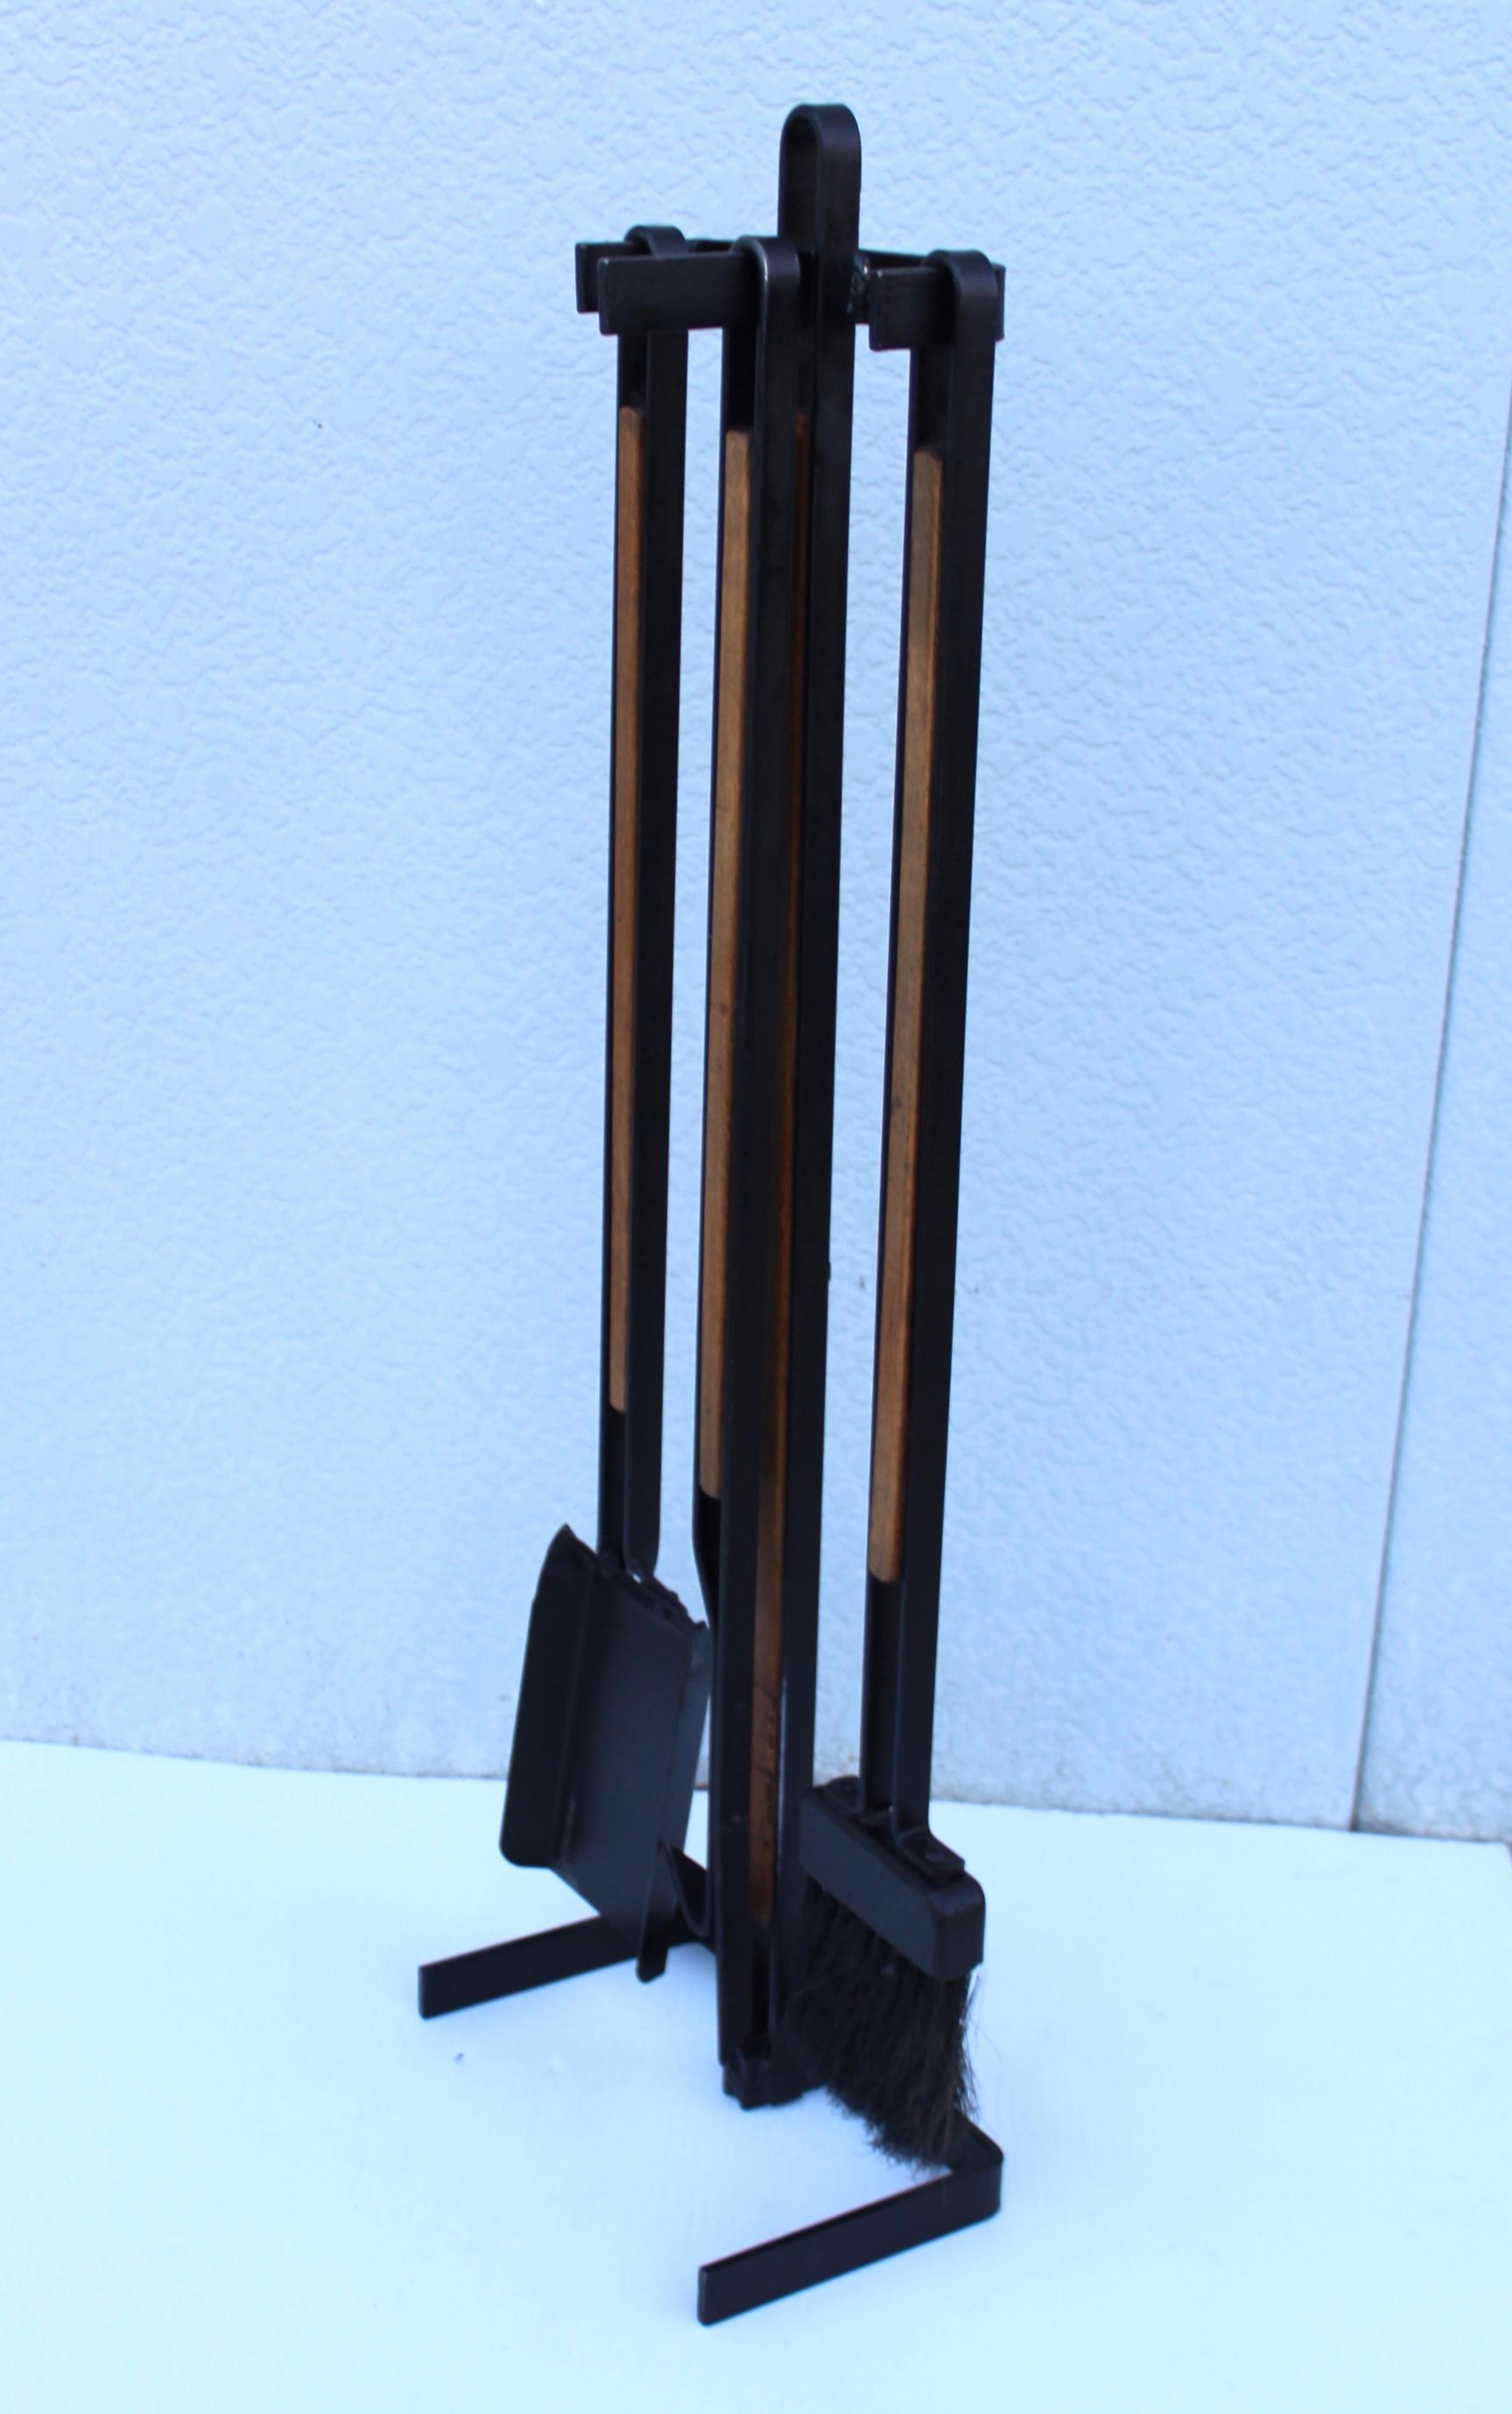 1960s Mid-Century Modern oak and iron fireplace tools attributed to Tony Paul, in vintage original condition with some wear and patina due to age and use.